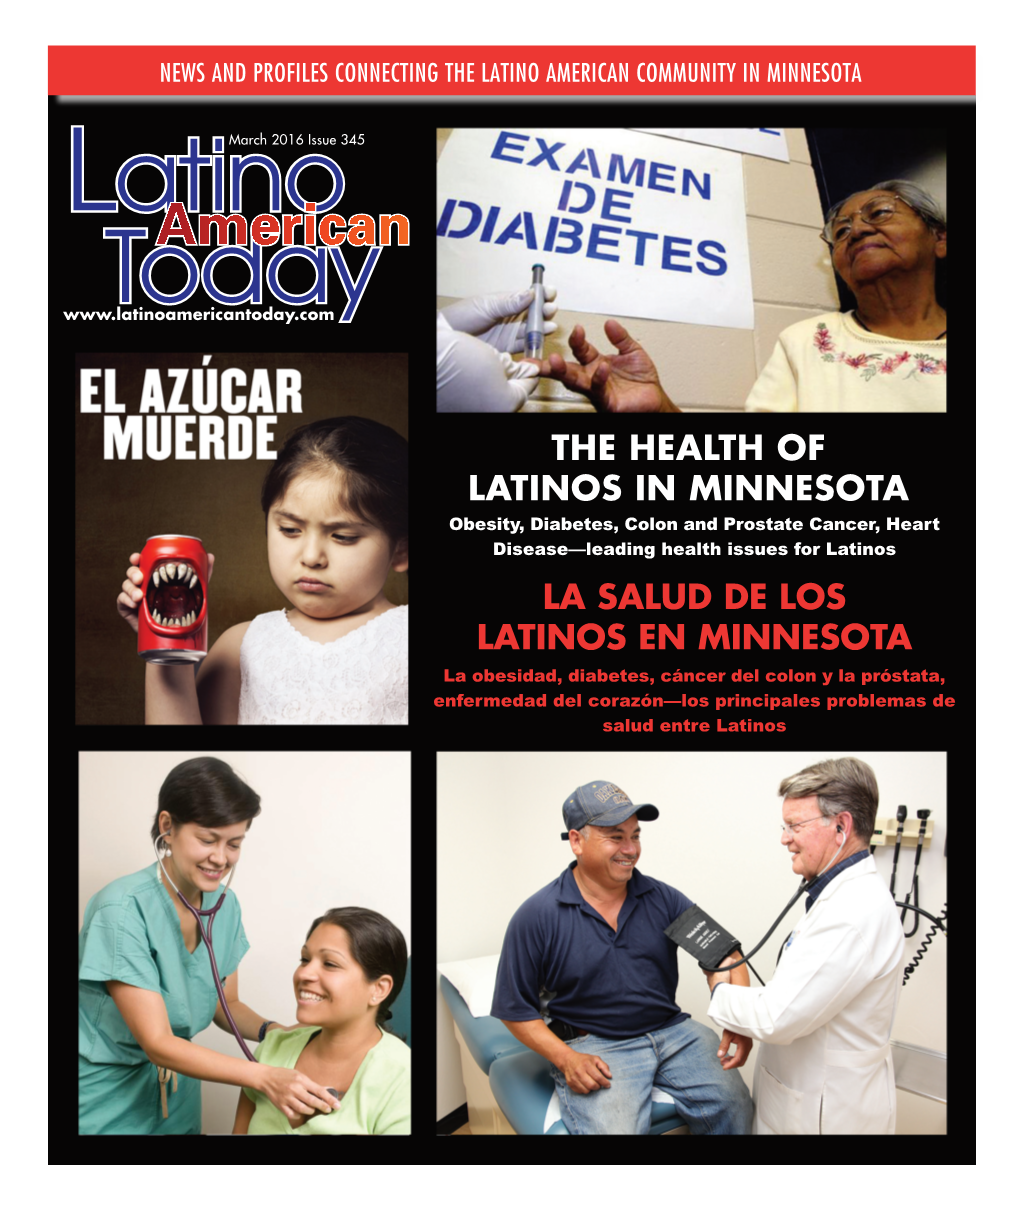 The Health of Latinos in Minnesota